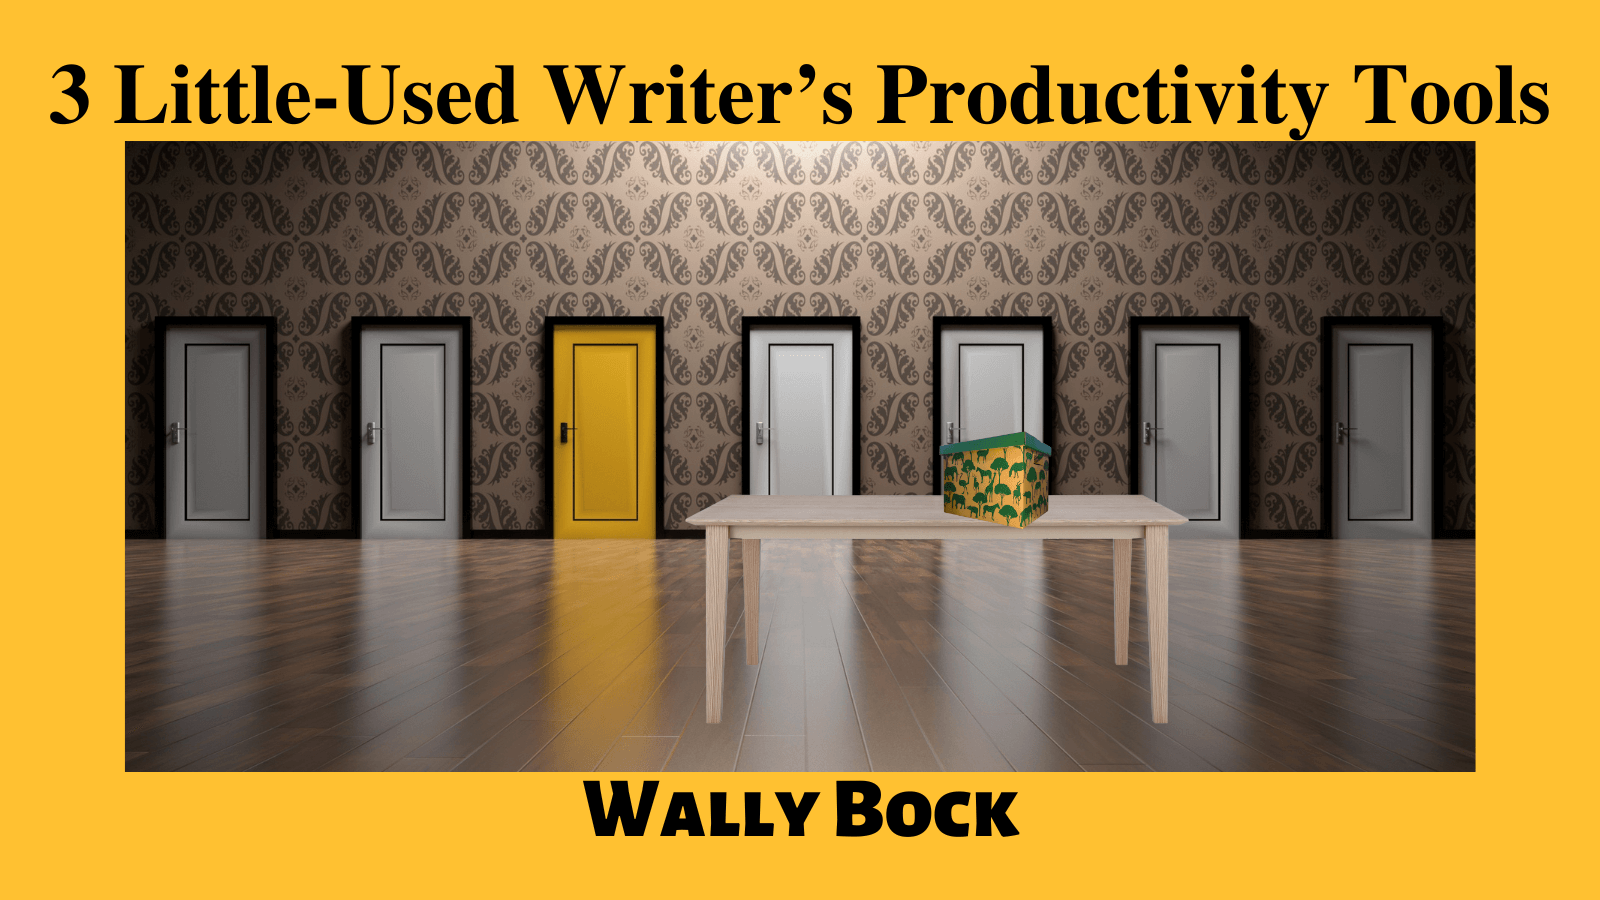 3 Little-Used Writer’s Productivity Tools